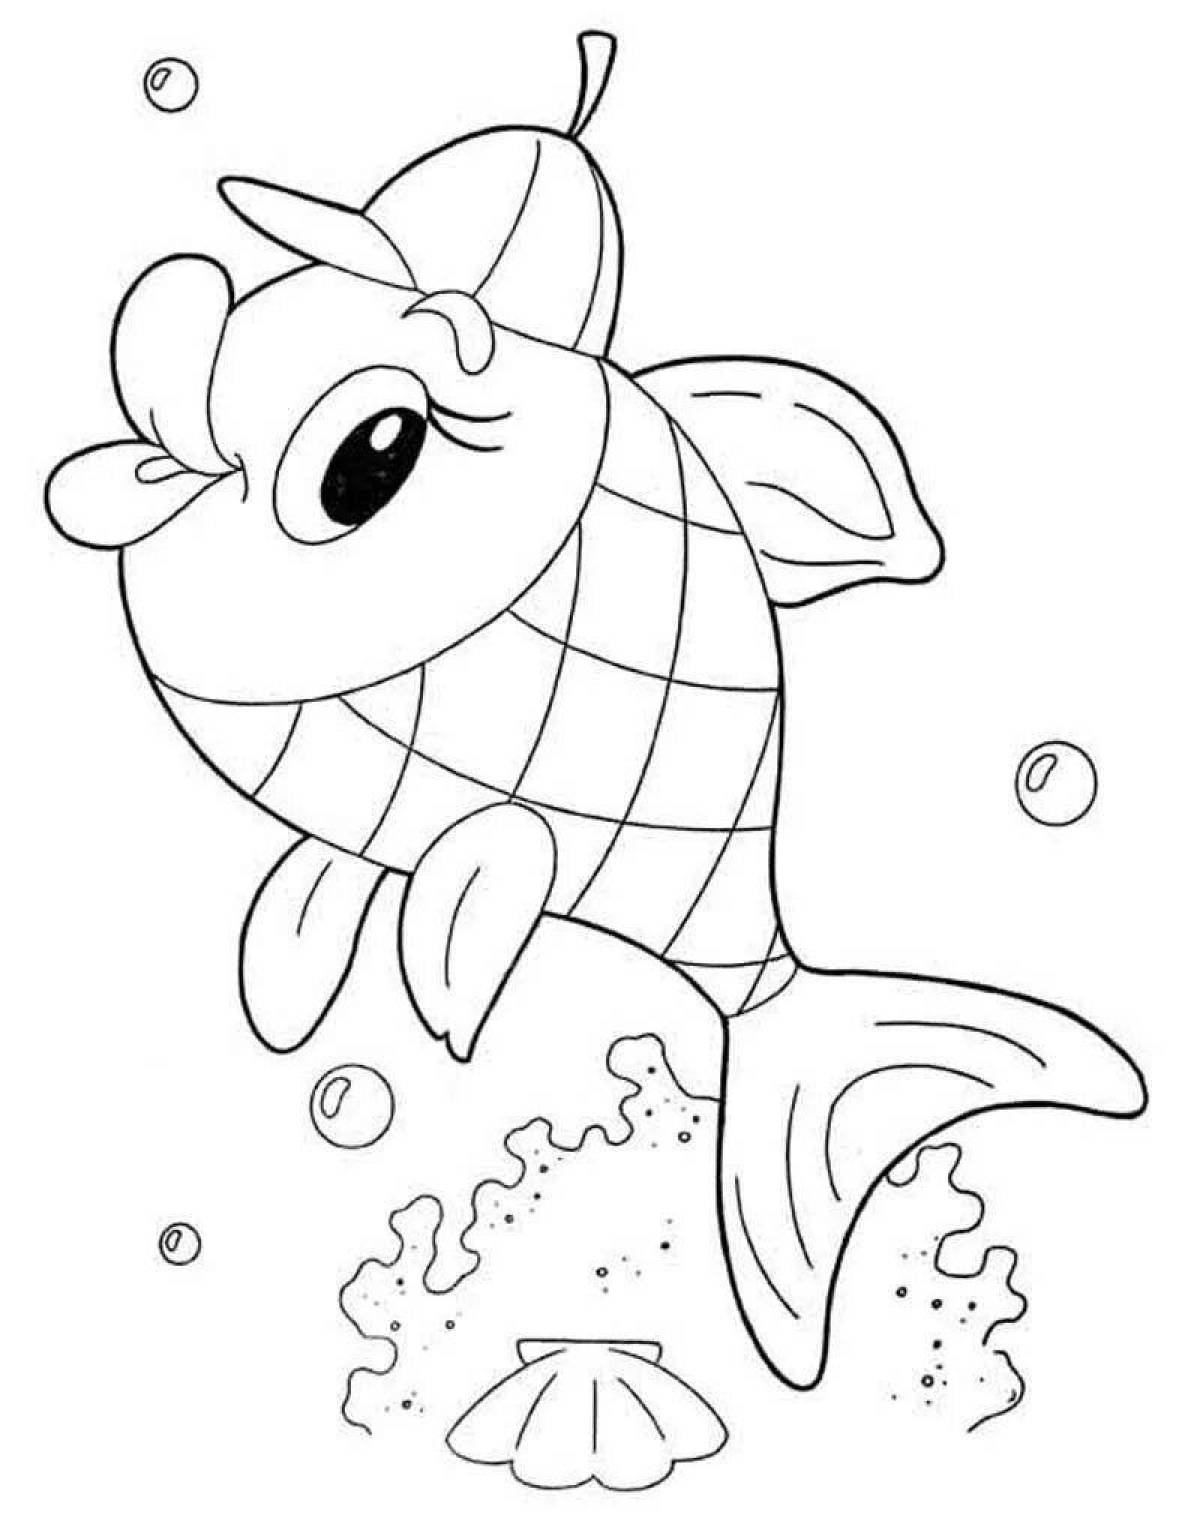 Fantastic goldfish coloring pages for kids